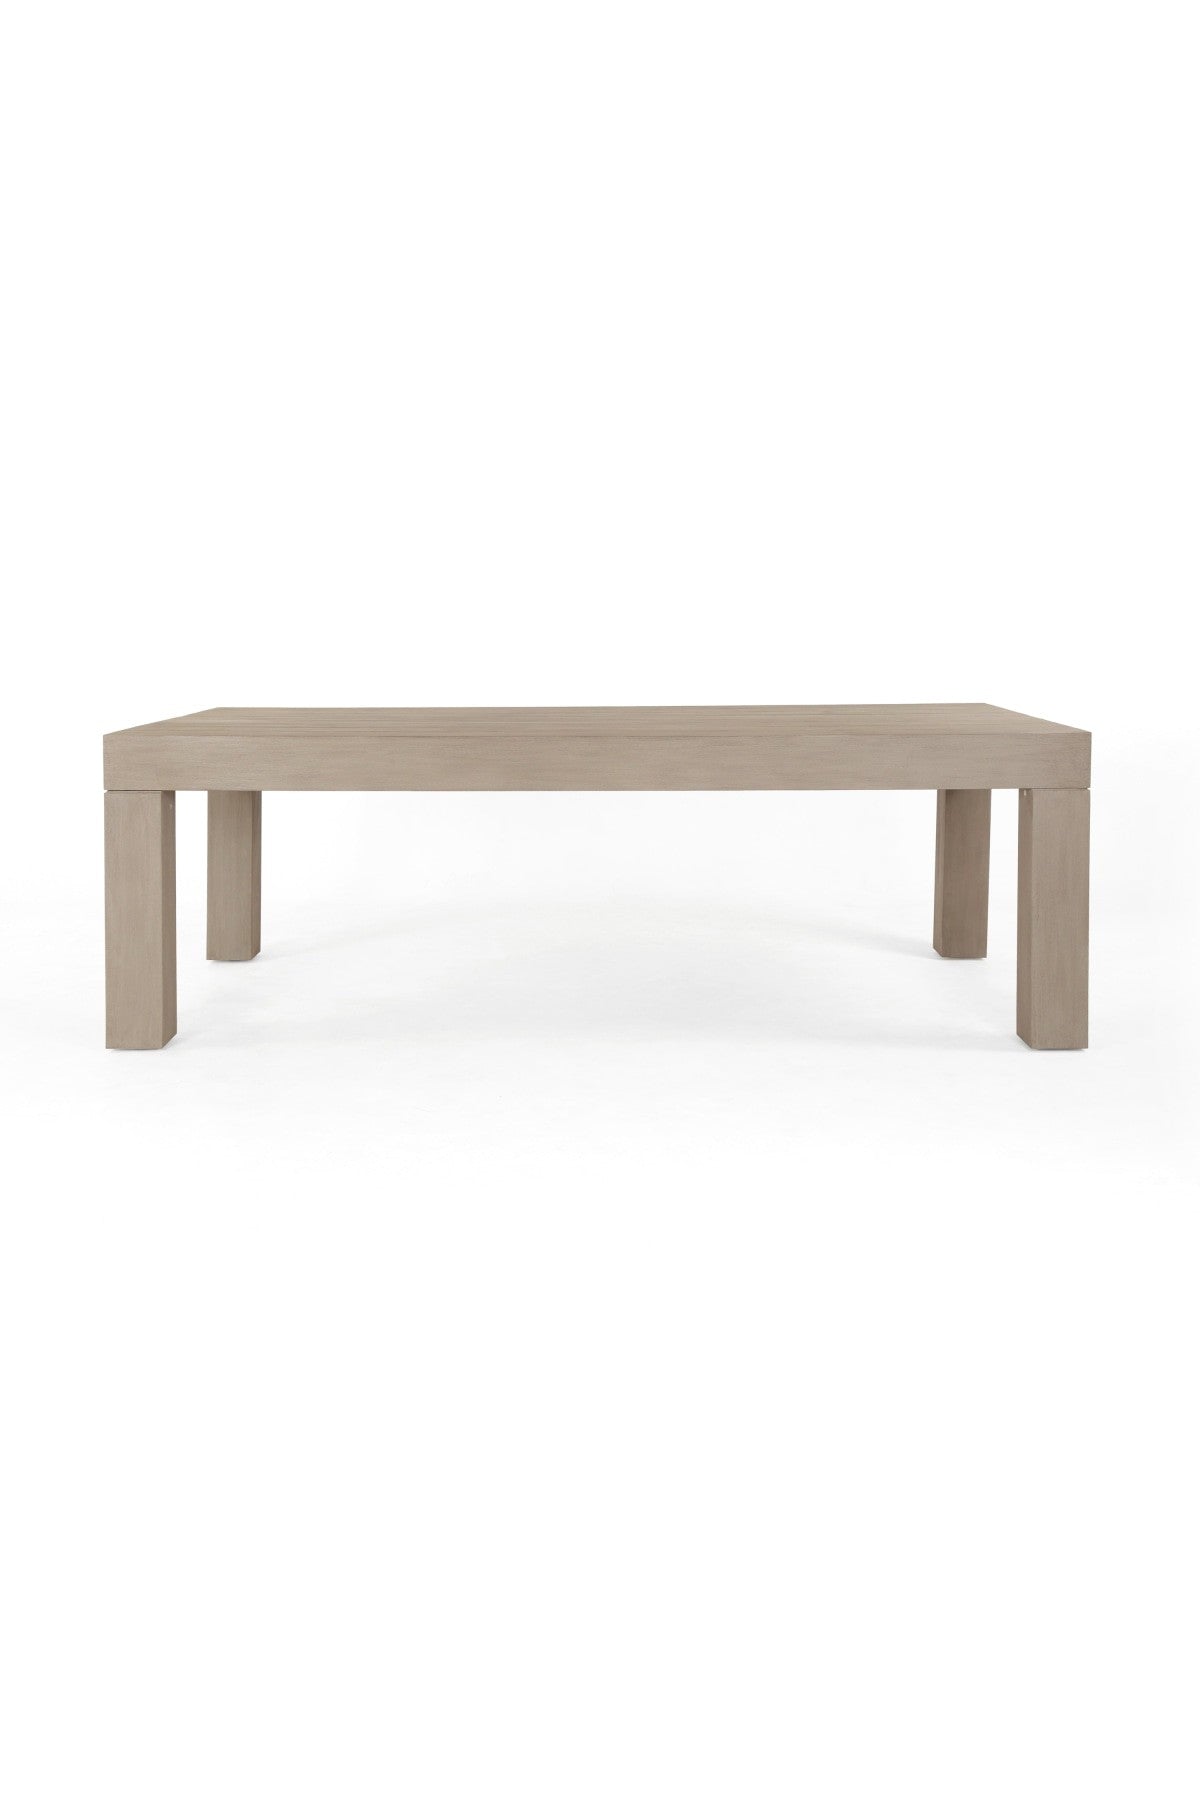 Carina Outdoor Dining Table - Washed Brown